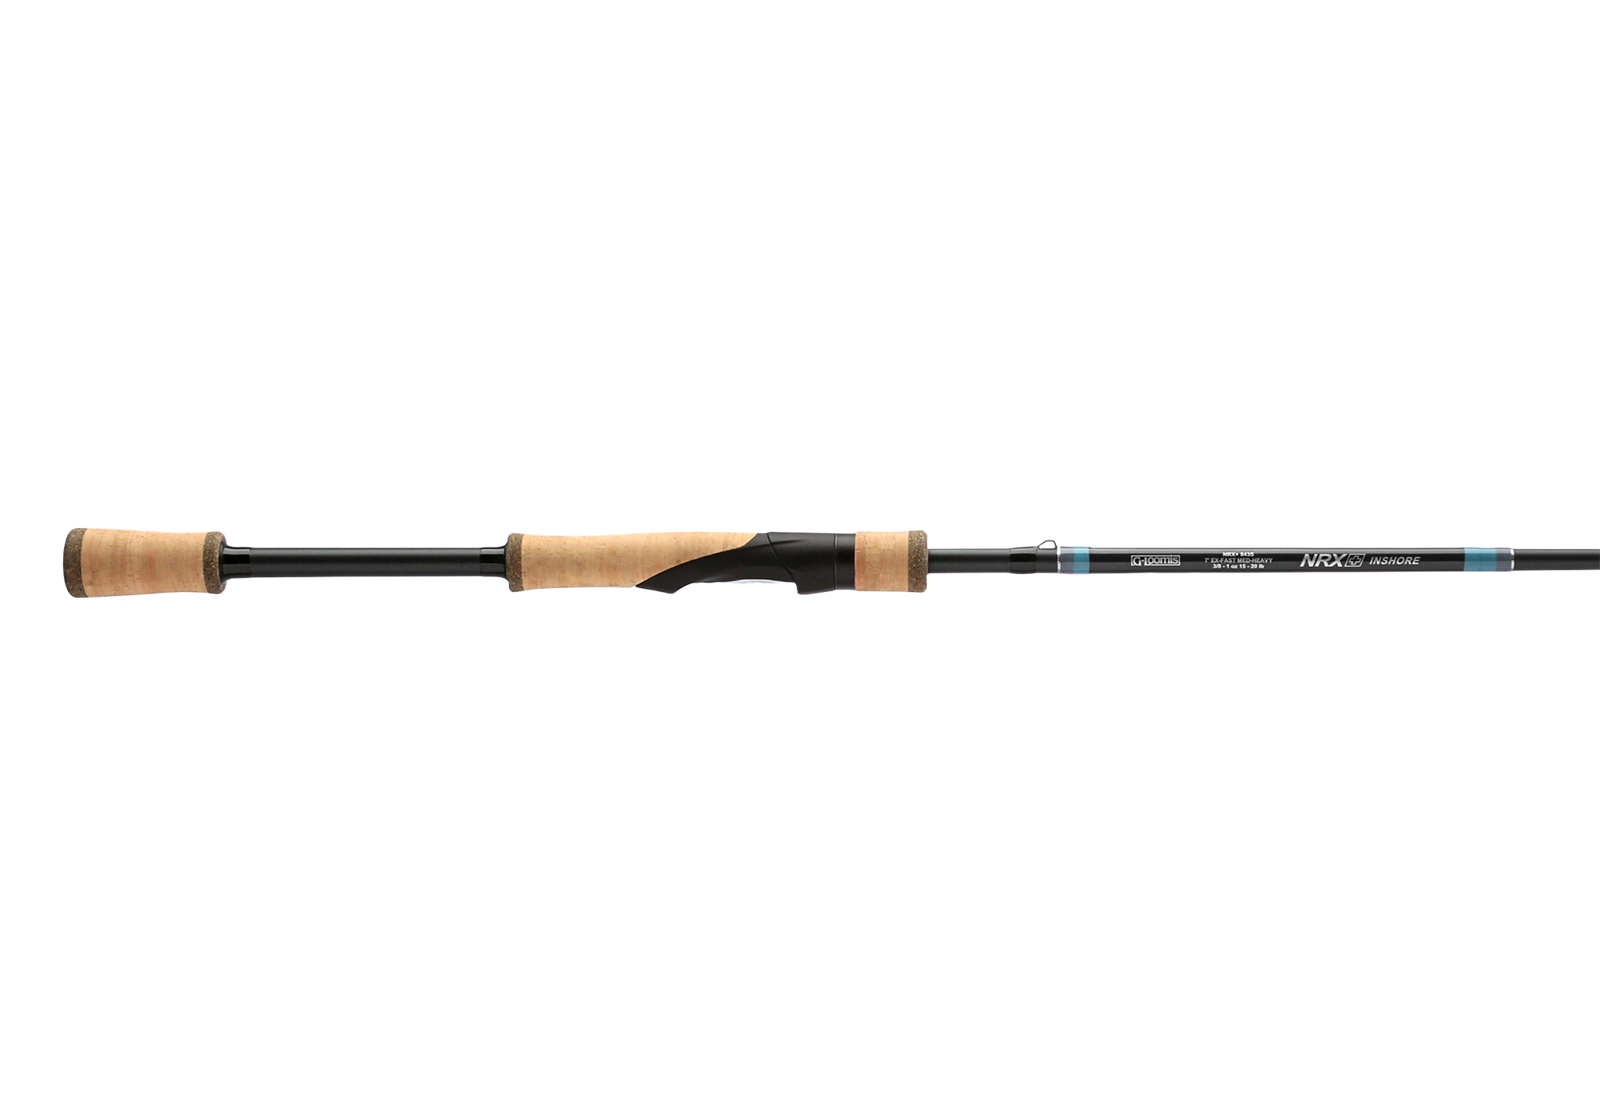 Shimano Saltwater Fishing Rod Casting Fishing Rods 5 ft 8 in Item